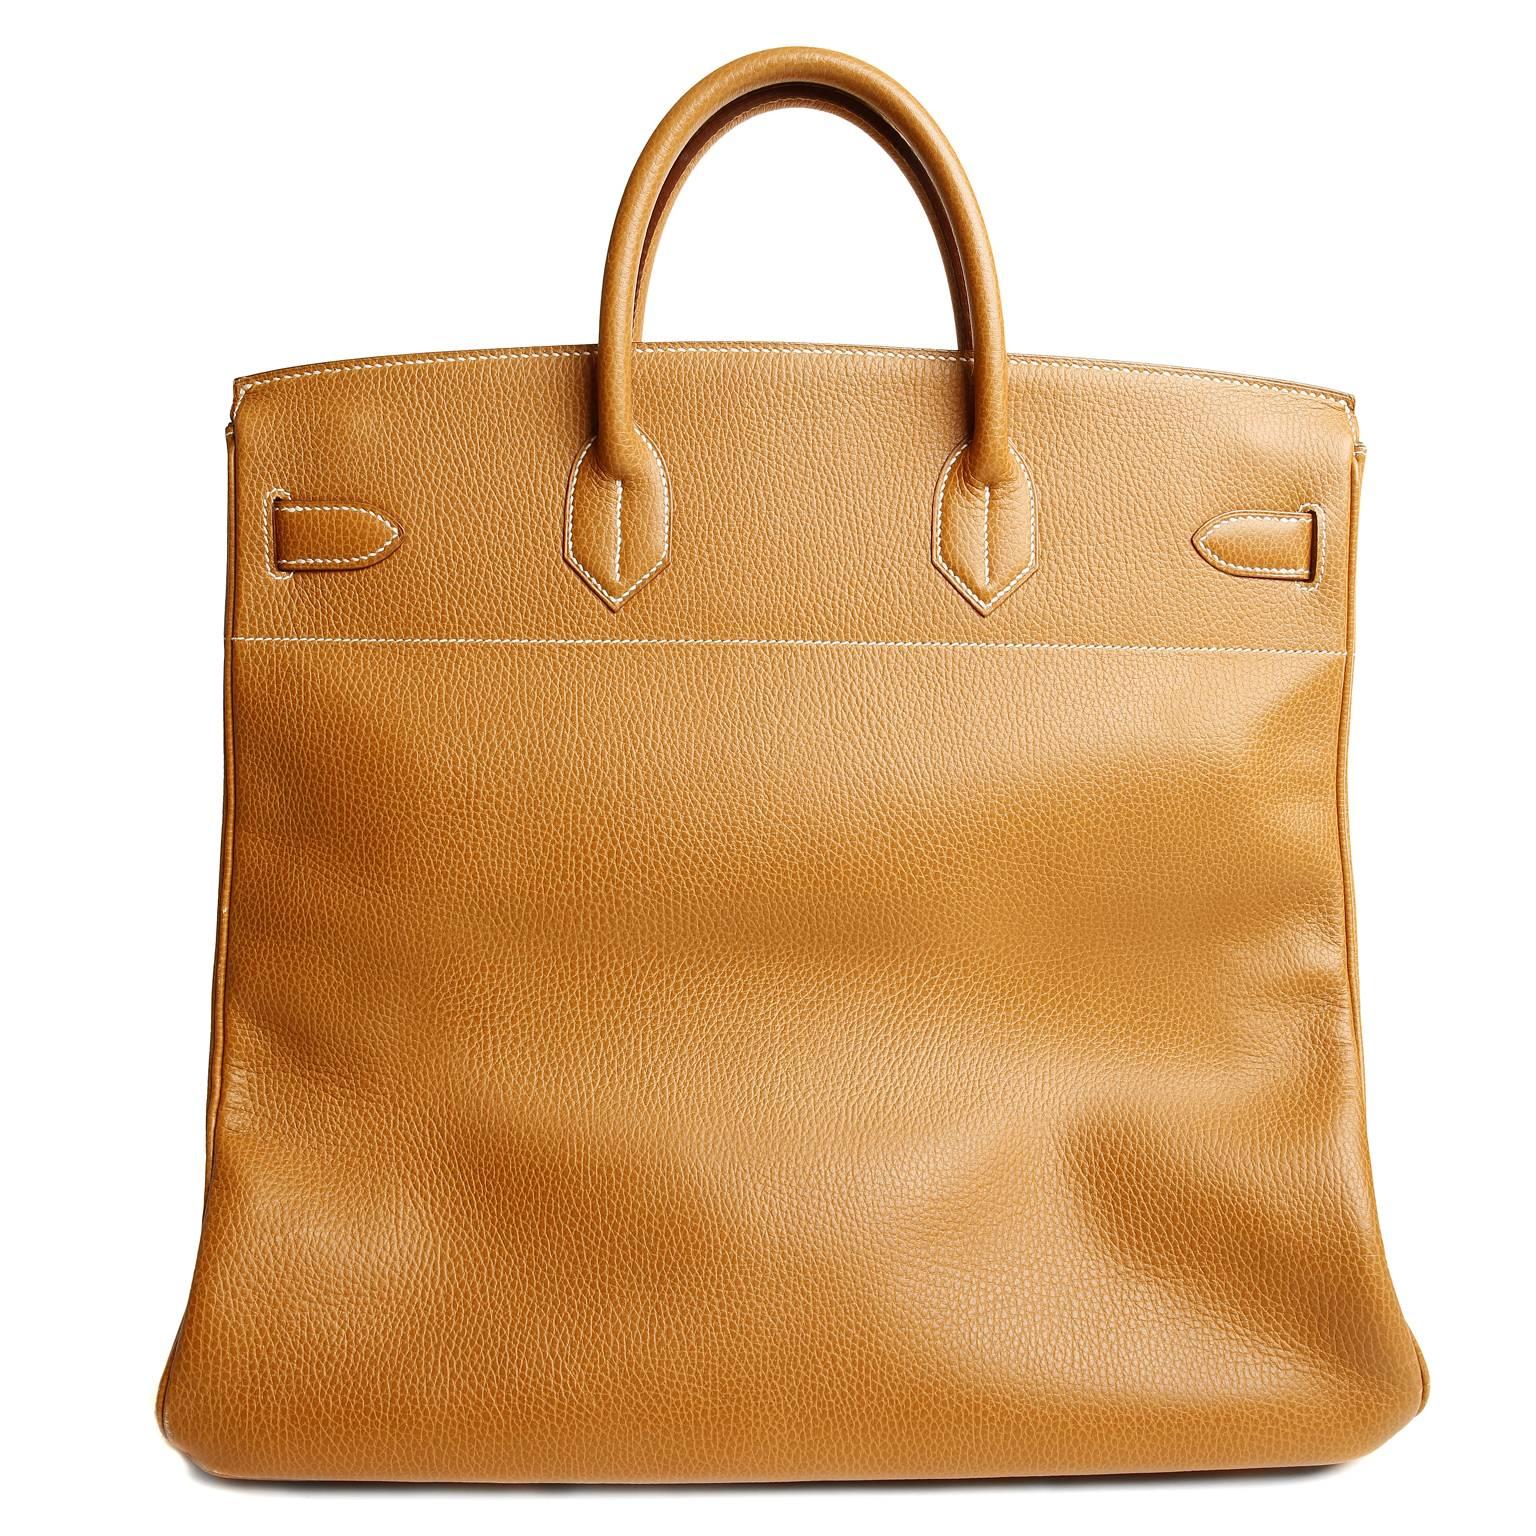 Hermès 45 cm Haut a Courroies, Natural Ardennes Leather- excellent condition.
Hermès  bags are considered the ultimate luxury item- hand stitched  with extensive wait lists.  Crafted in Natural Ardennes leather with gold hardware, this HAC is the